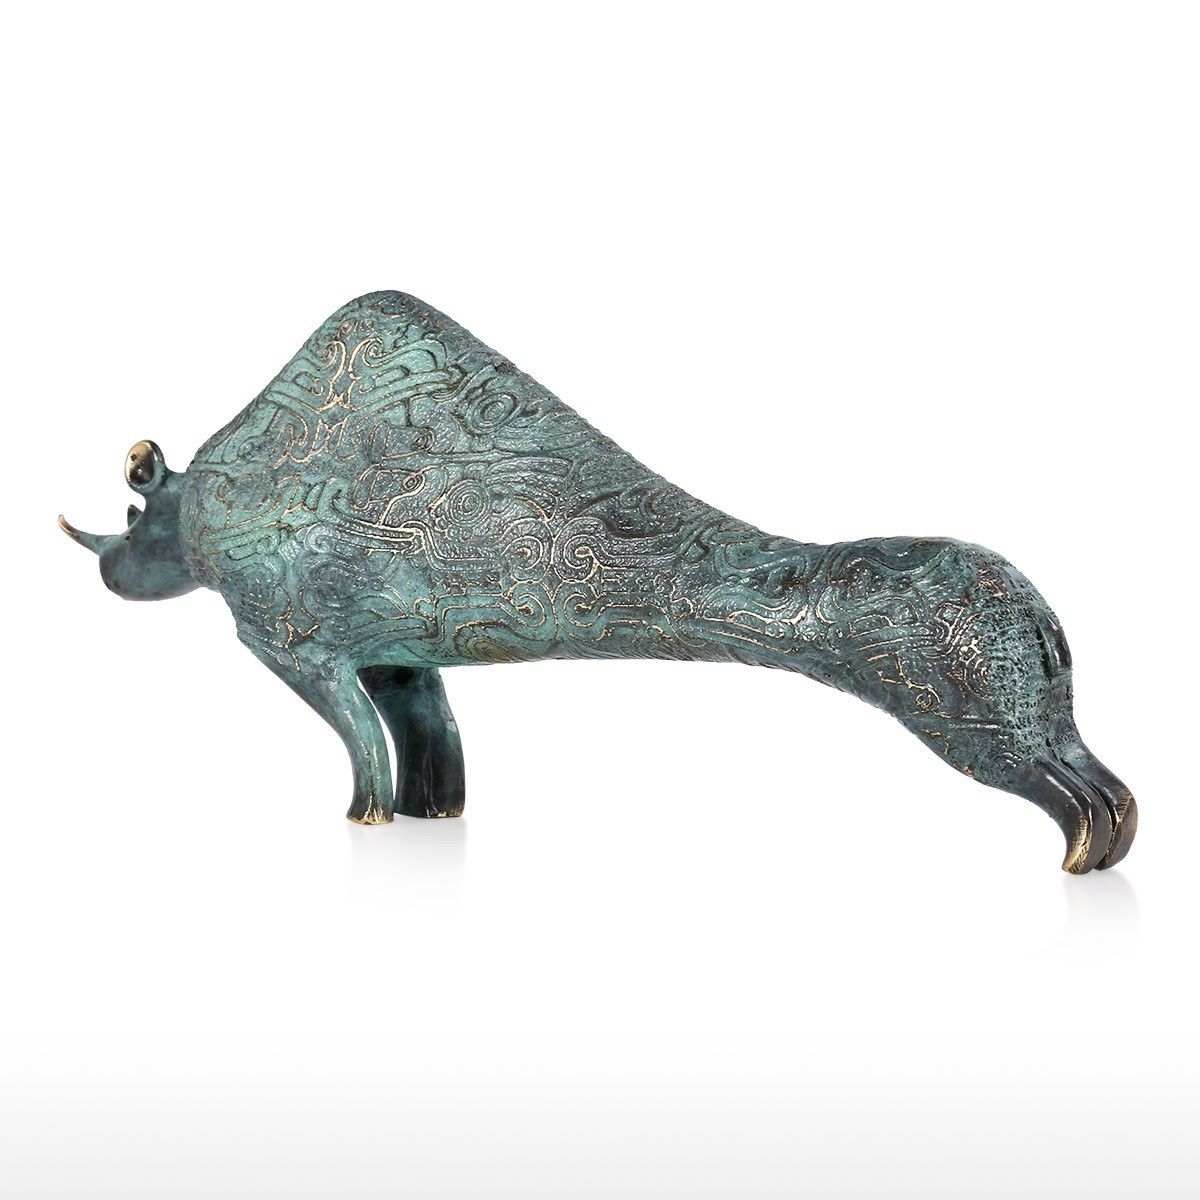 Rhinoceros 3D Bronze Sculpture and Bronze Statue for Home Decor and Living Room Decorations